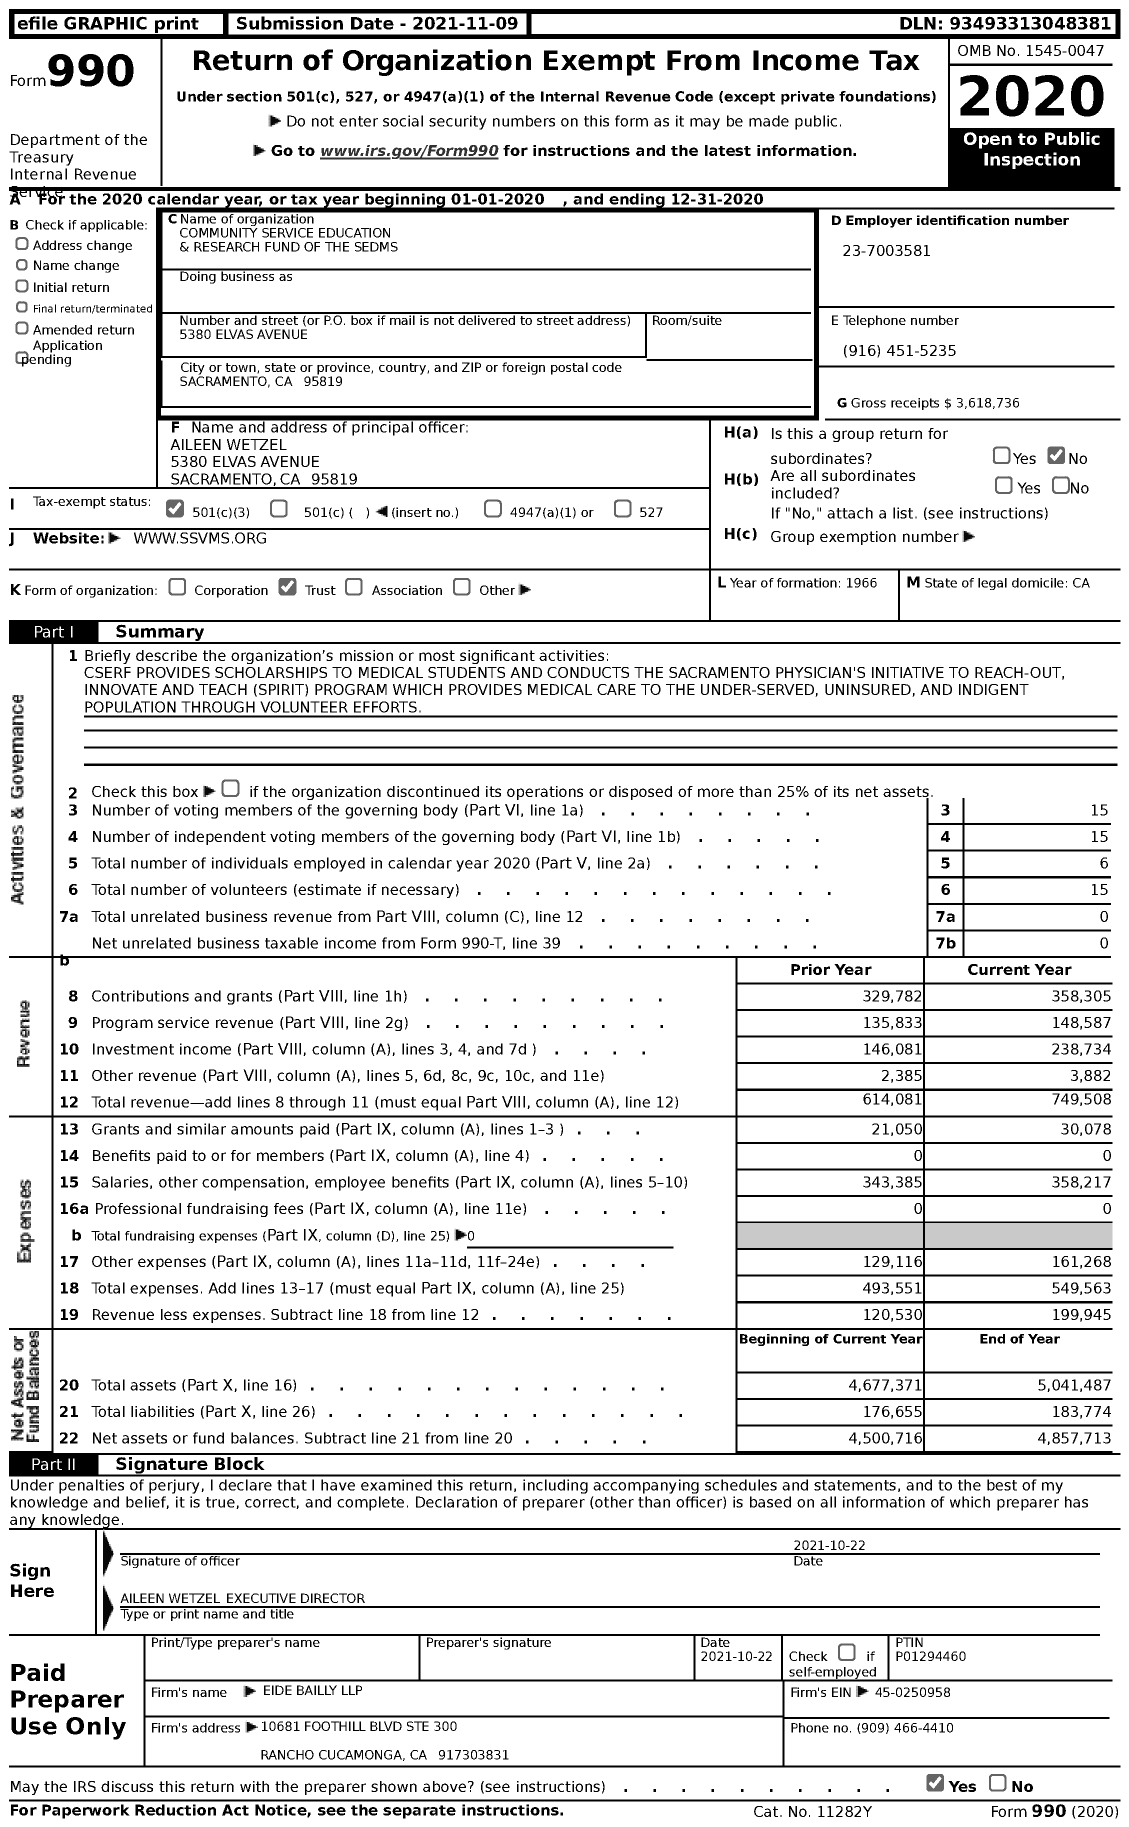 Image of first page of 2020 Form 990 for Community Service Education and Research Fund of the SEDMS